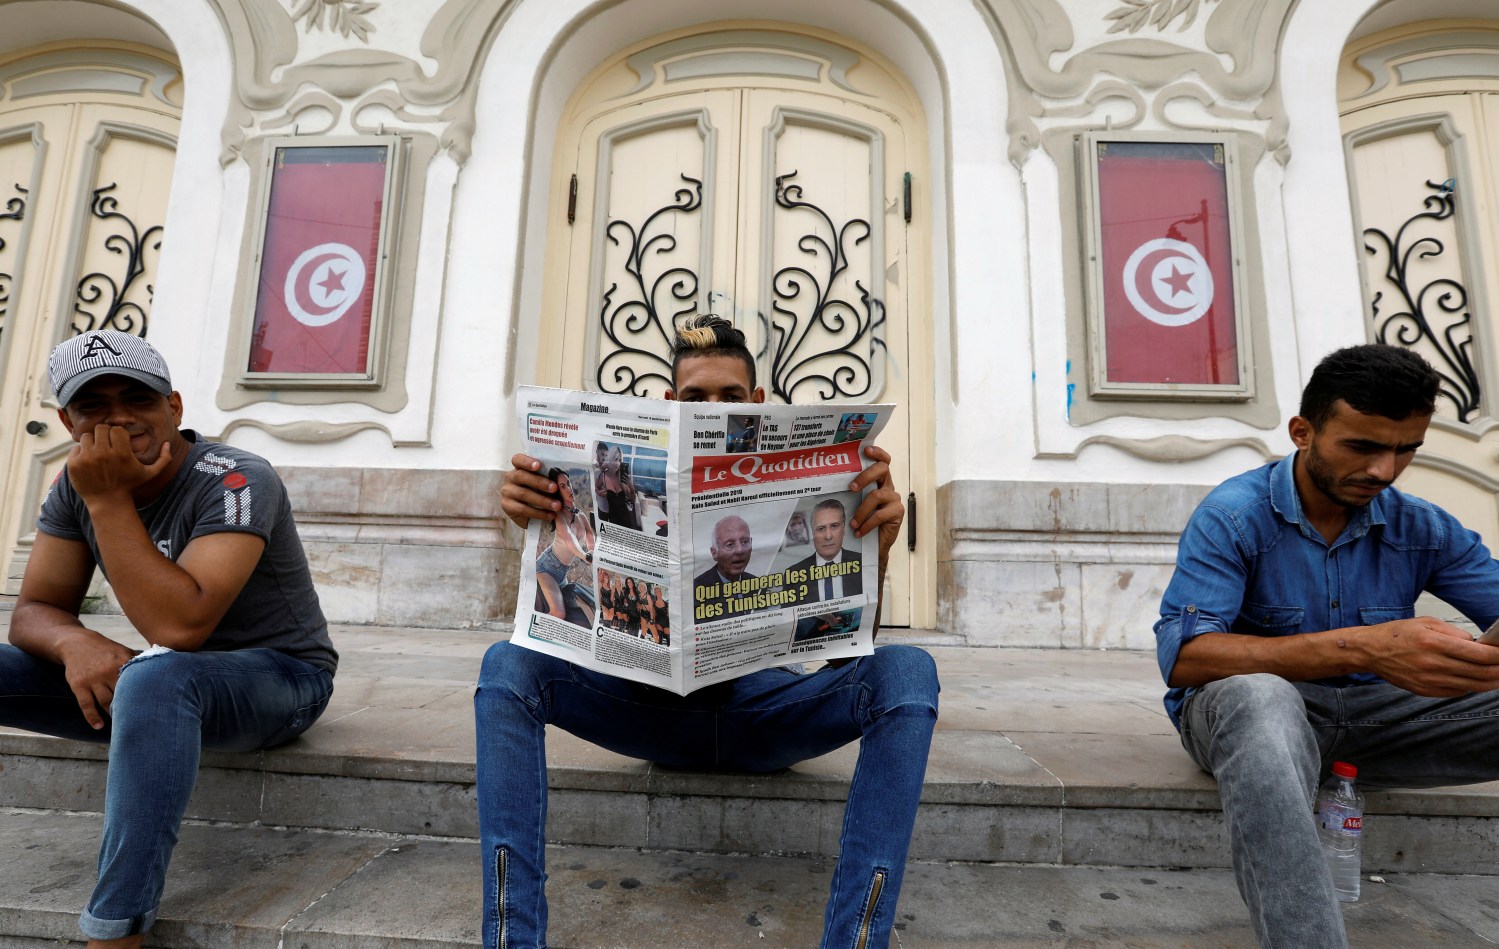 A man reads a local newspaper displaying pictures of two candidates for the second round of Tunisia's presidential election, in Tunis, Tunisia September 18, 2019. REUTERS/Zoubeir Souissi - RC1B2D4B94C0